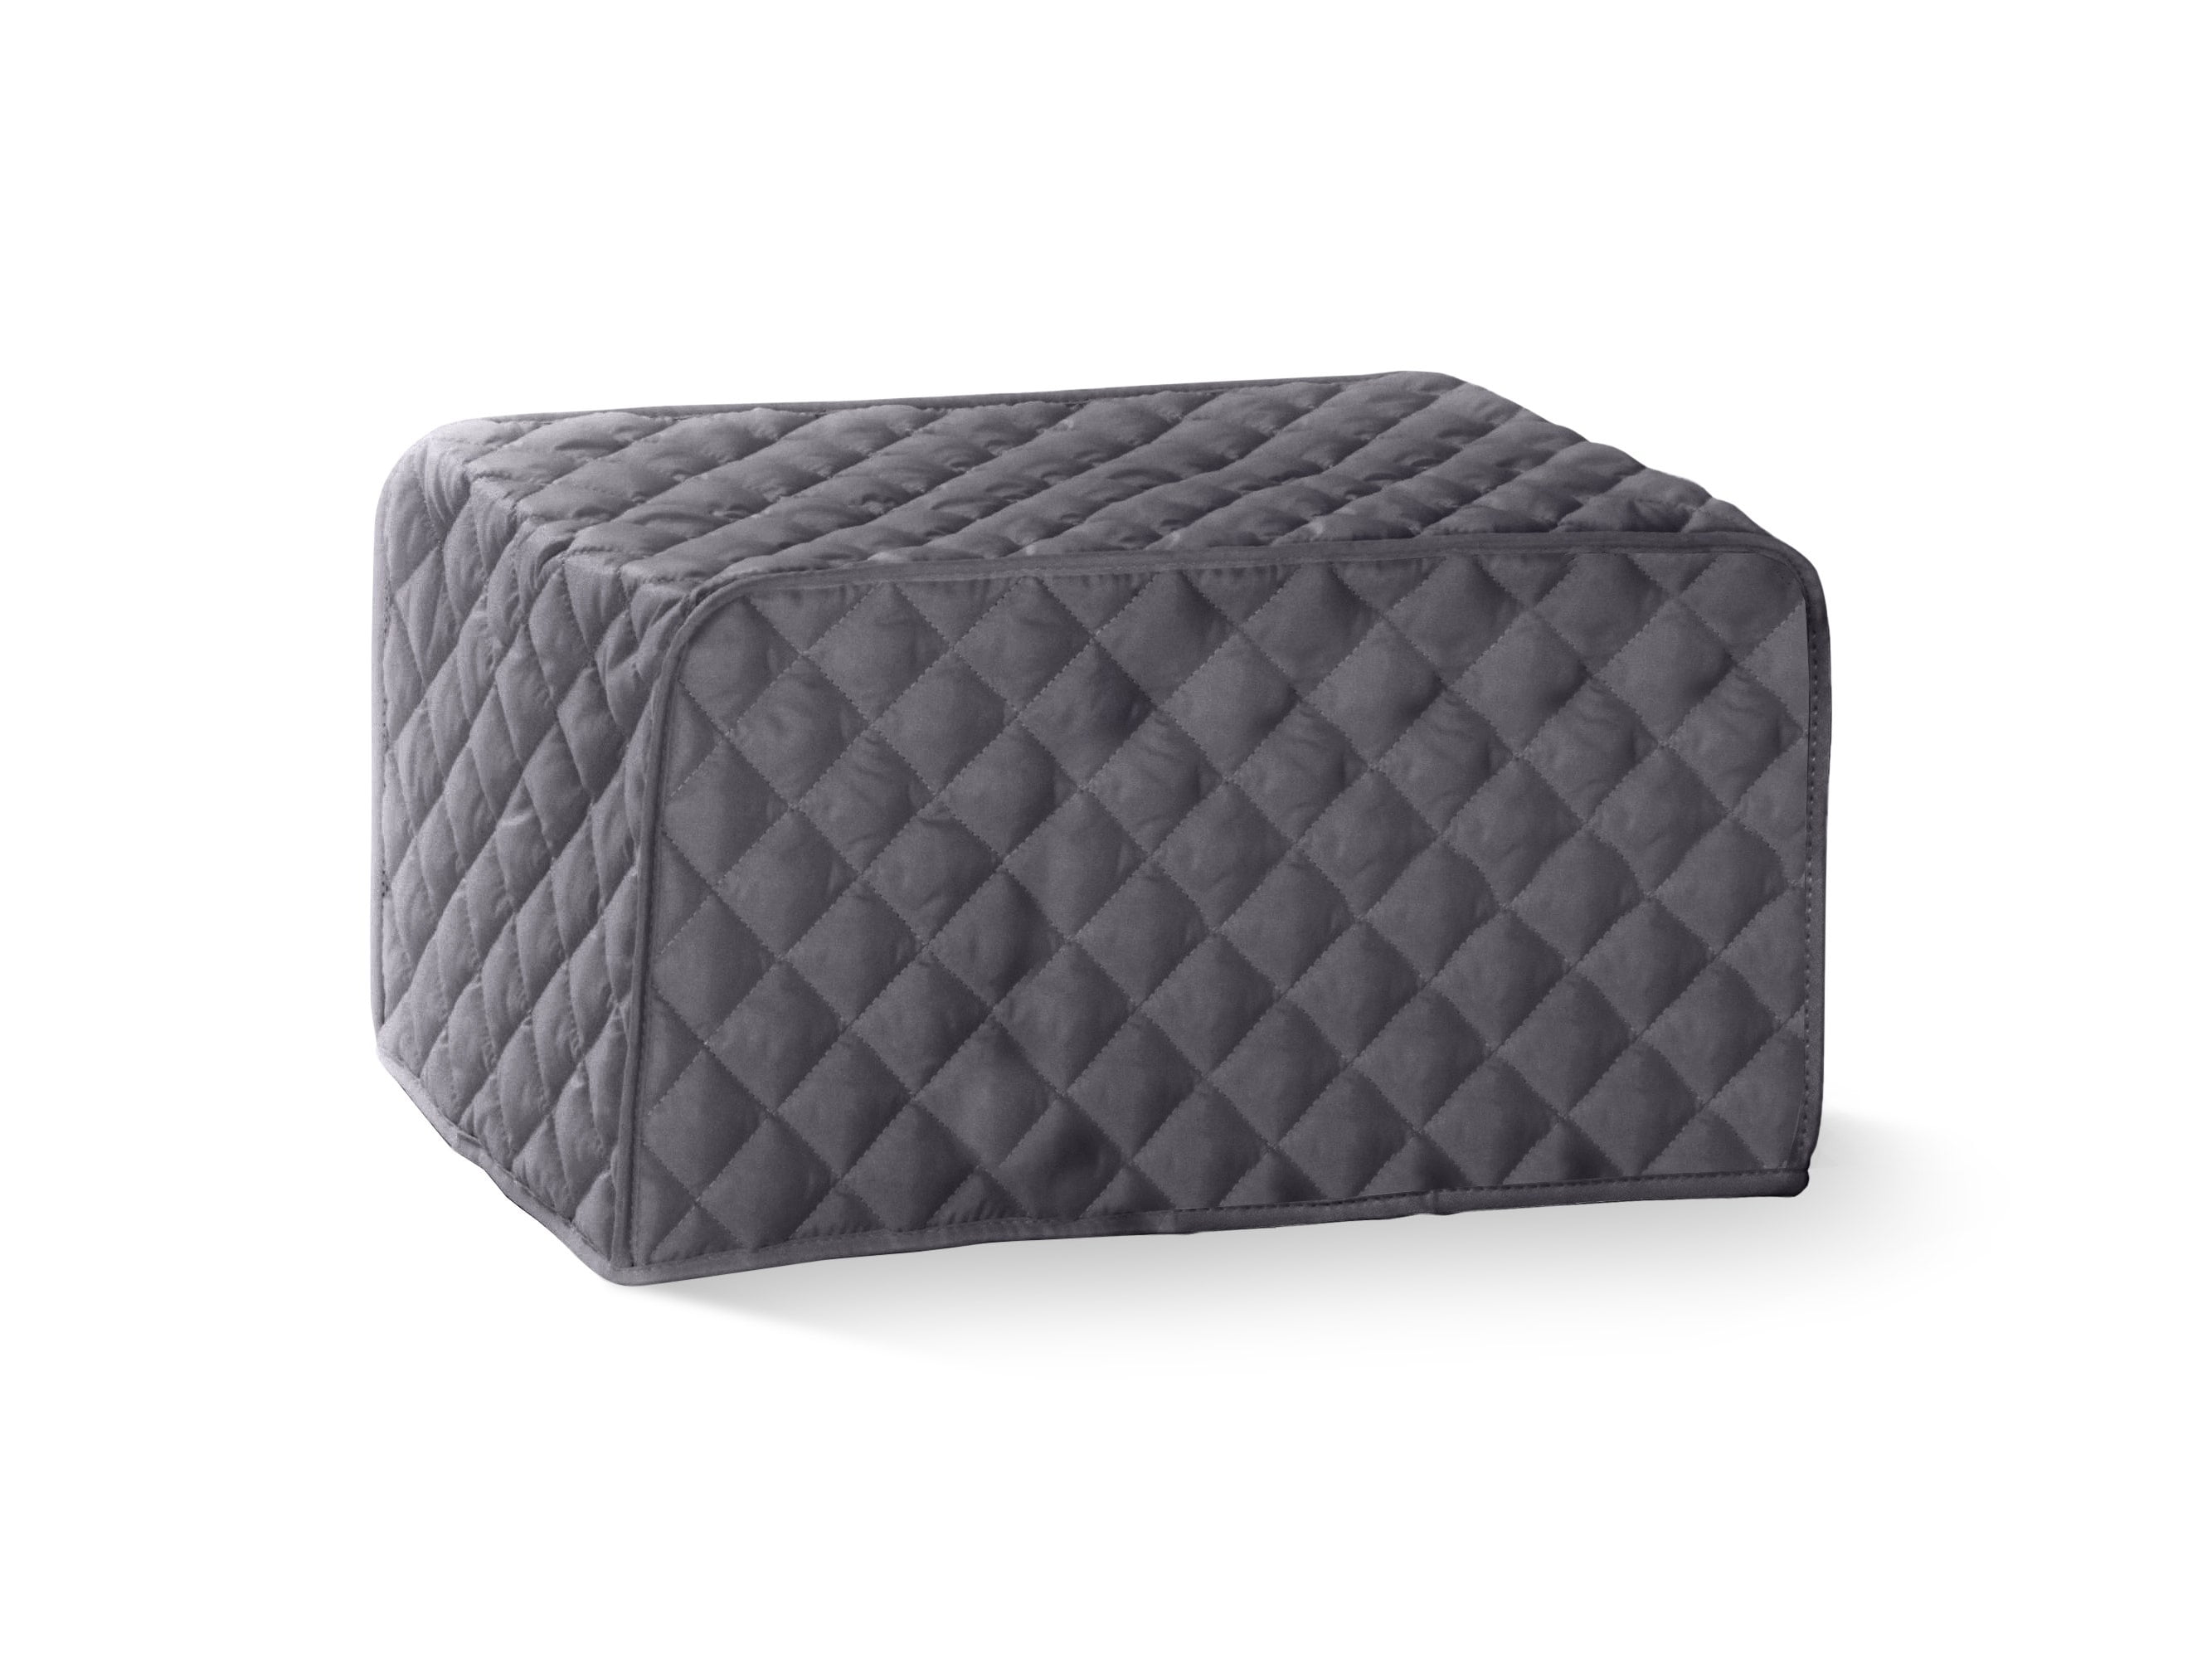 Covermates Keepsakes Mixer Cover Dust Protection - Stain Resistant - Washable Appliance Cover-Slate, Size: 12W x 8D x 17H, Gray